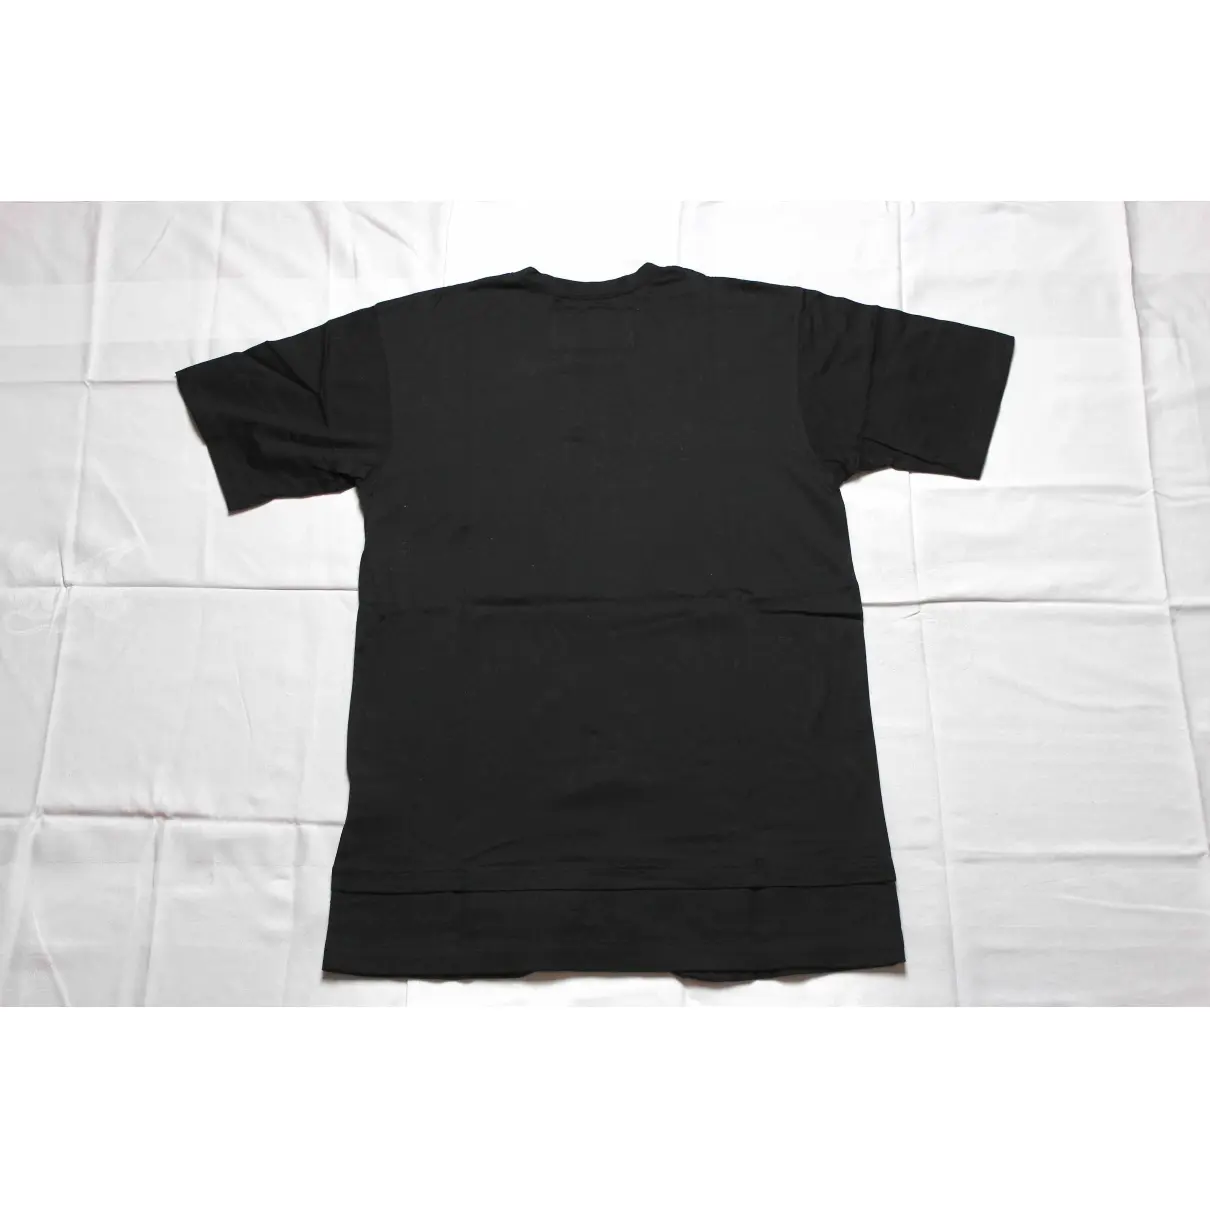 Casely-Hayford Black Cotton T-shirt for sale